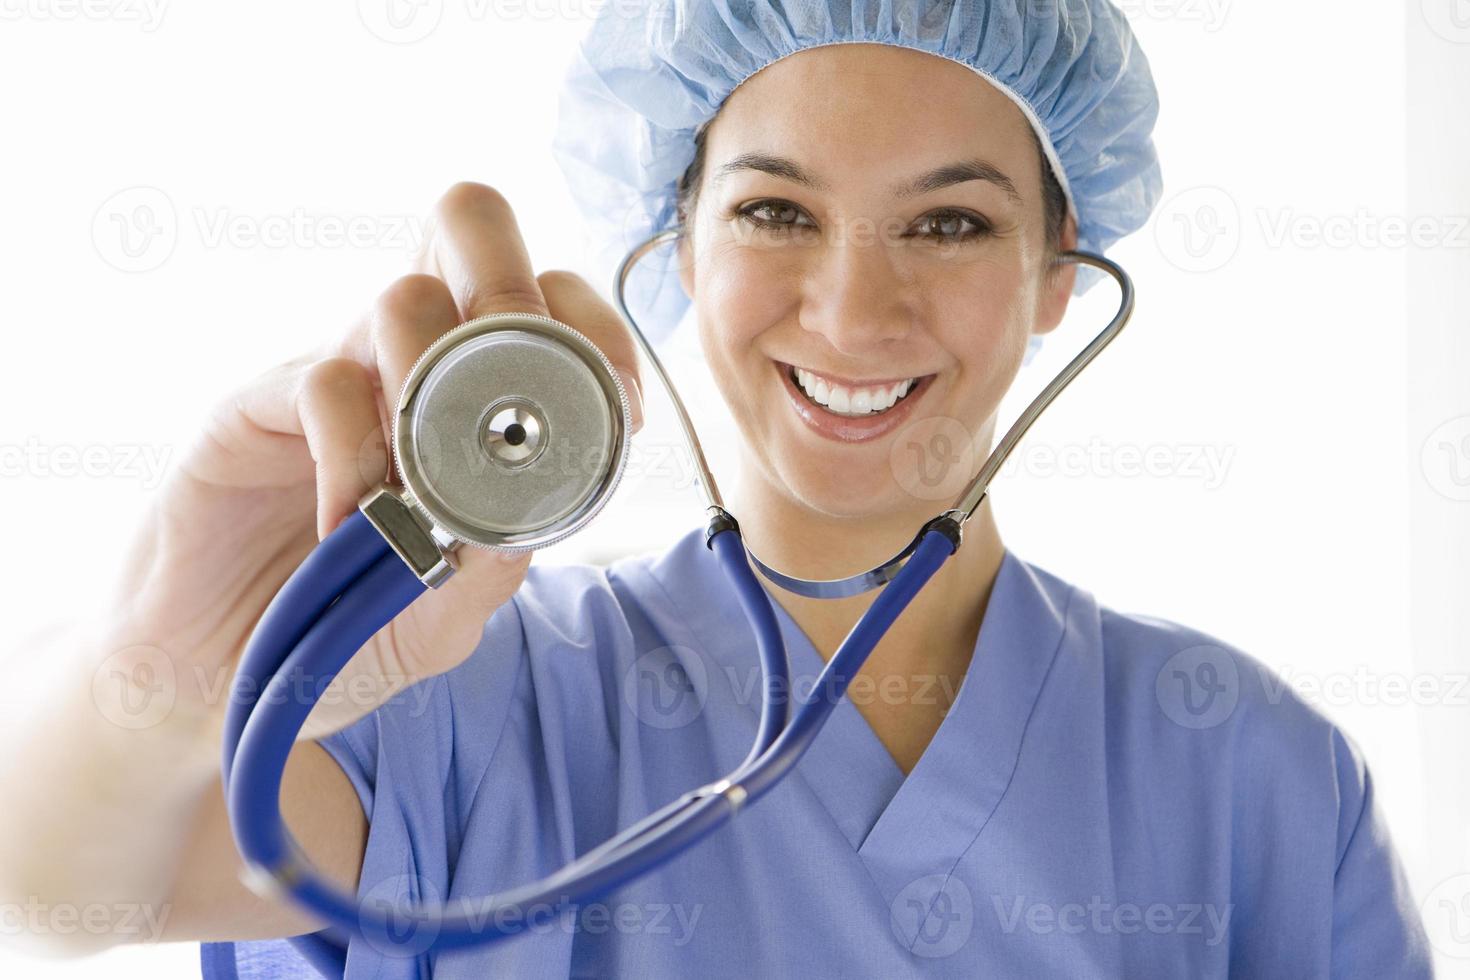 Female doctor with stethoscope, smiling, portrait photo